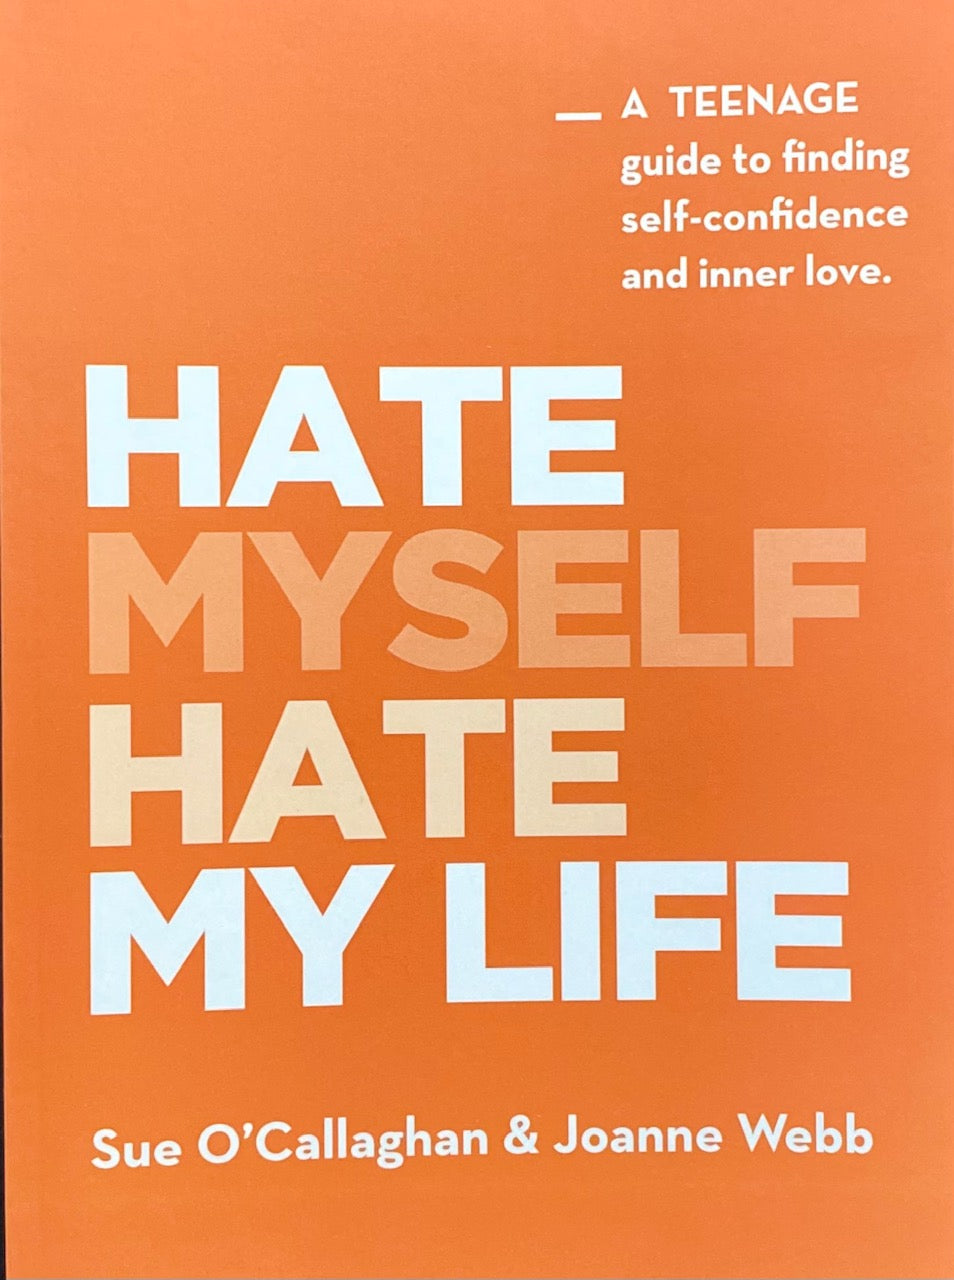 Hate Myself Hate My Life by Sue O'Callaghan & Joanne Webb - City Books & Lotto